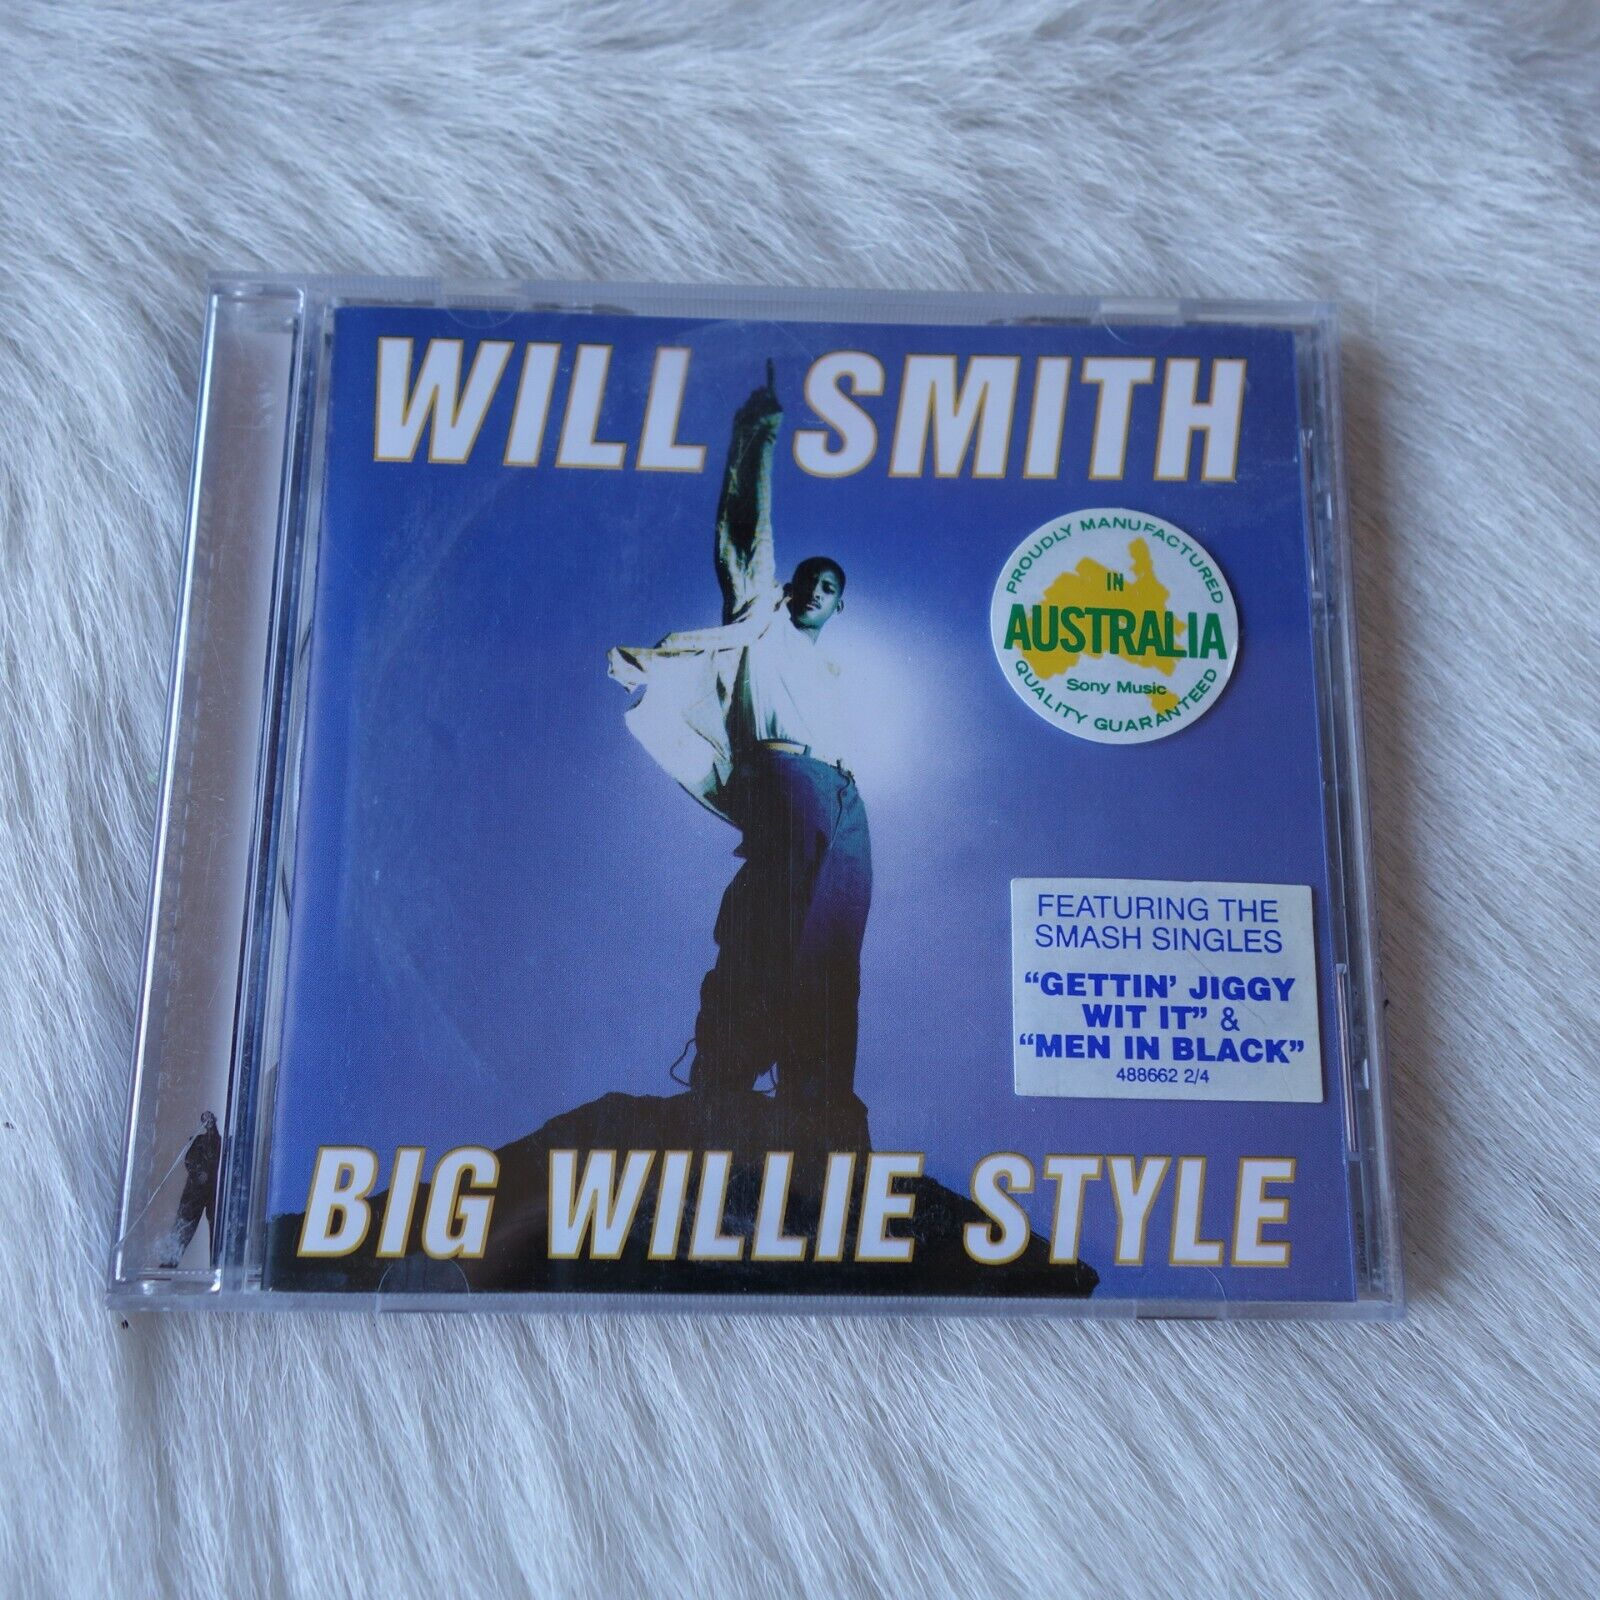 WILL SMITH BIG WILLIE STYLE Cd Will Smith Cd AUSTRALIAN RELEASE Cd Debut Album